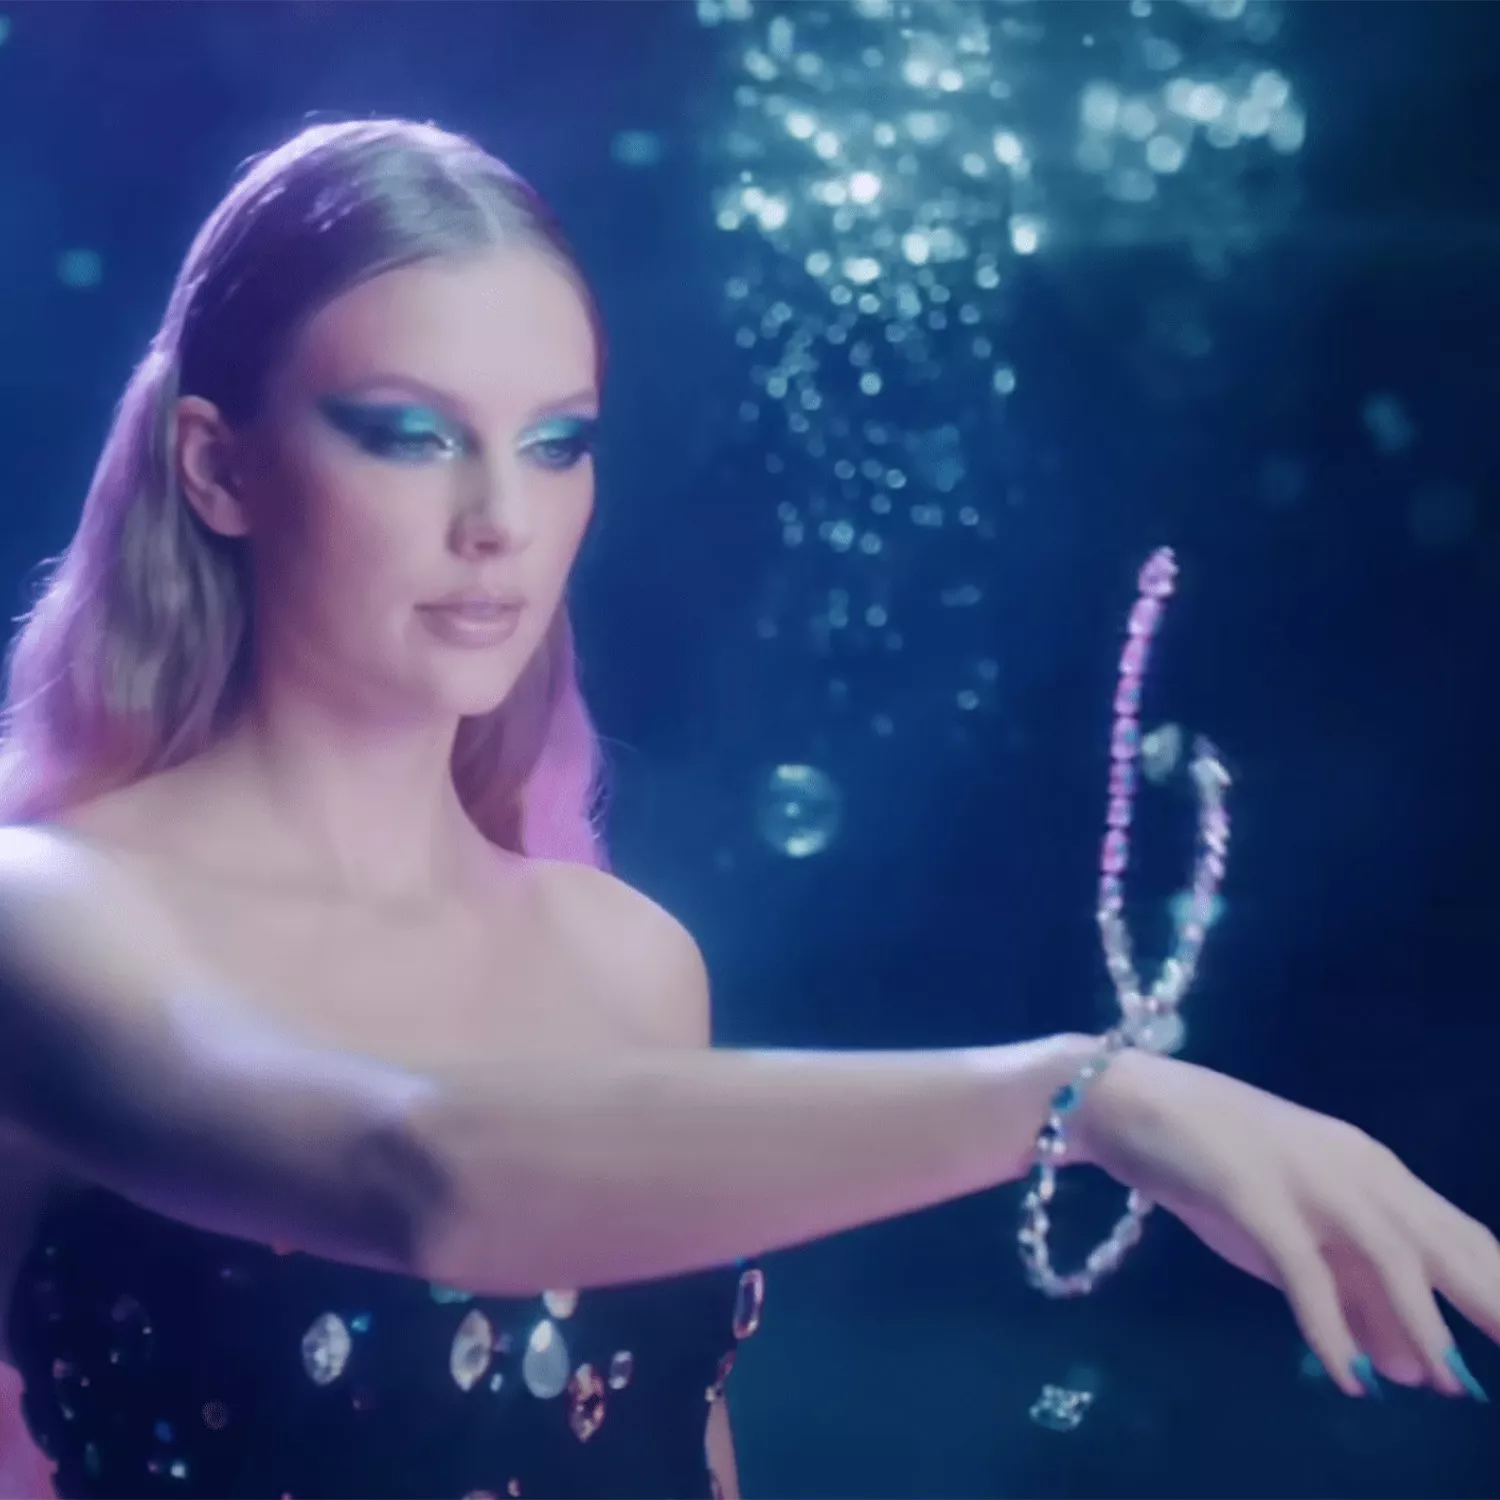 Taylor Swift in the Bejeweled video